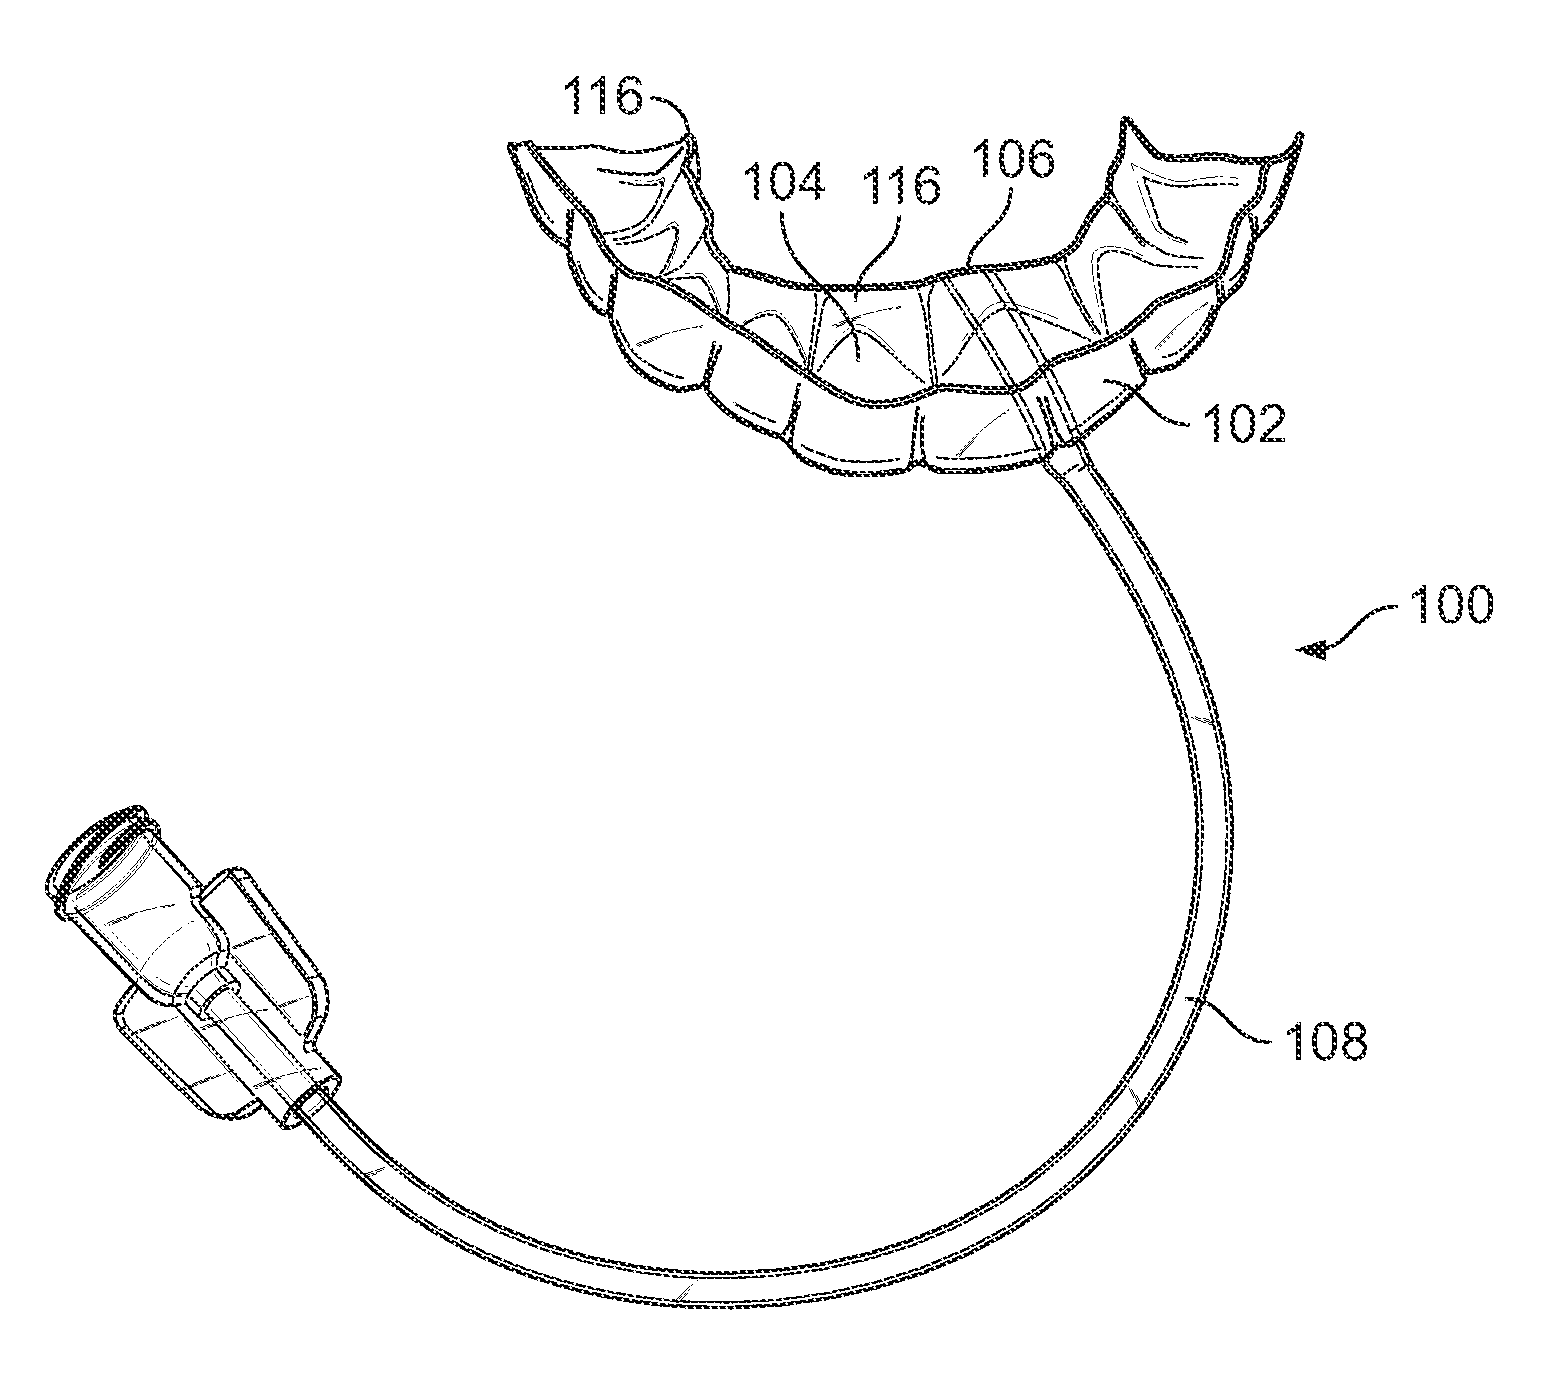 System and method for  delivering a therapy and sensing a biological activity in the mouth